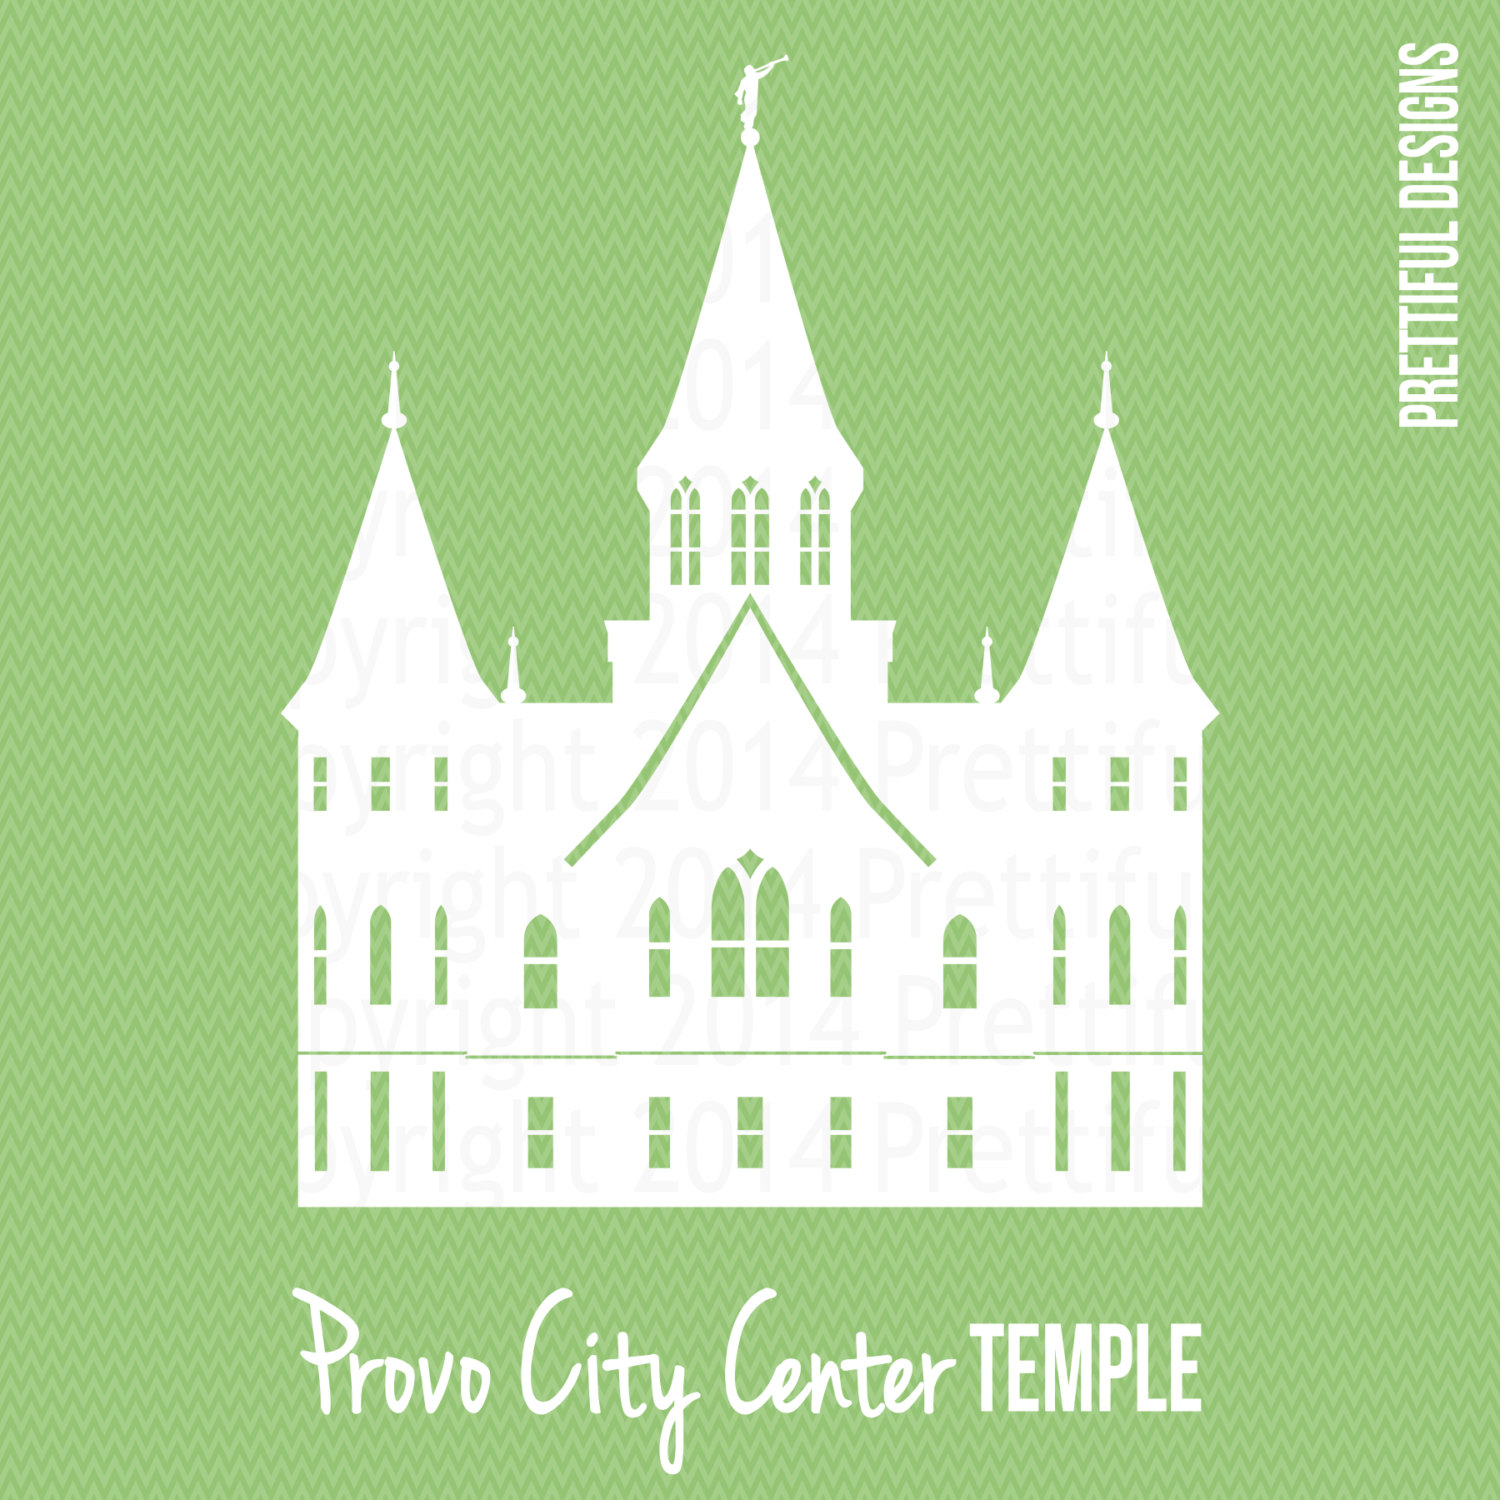 Provo City Center Temple Clipart Png.